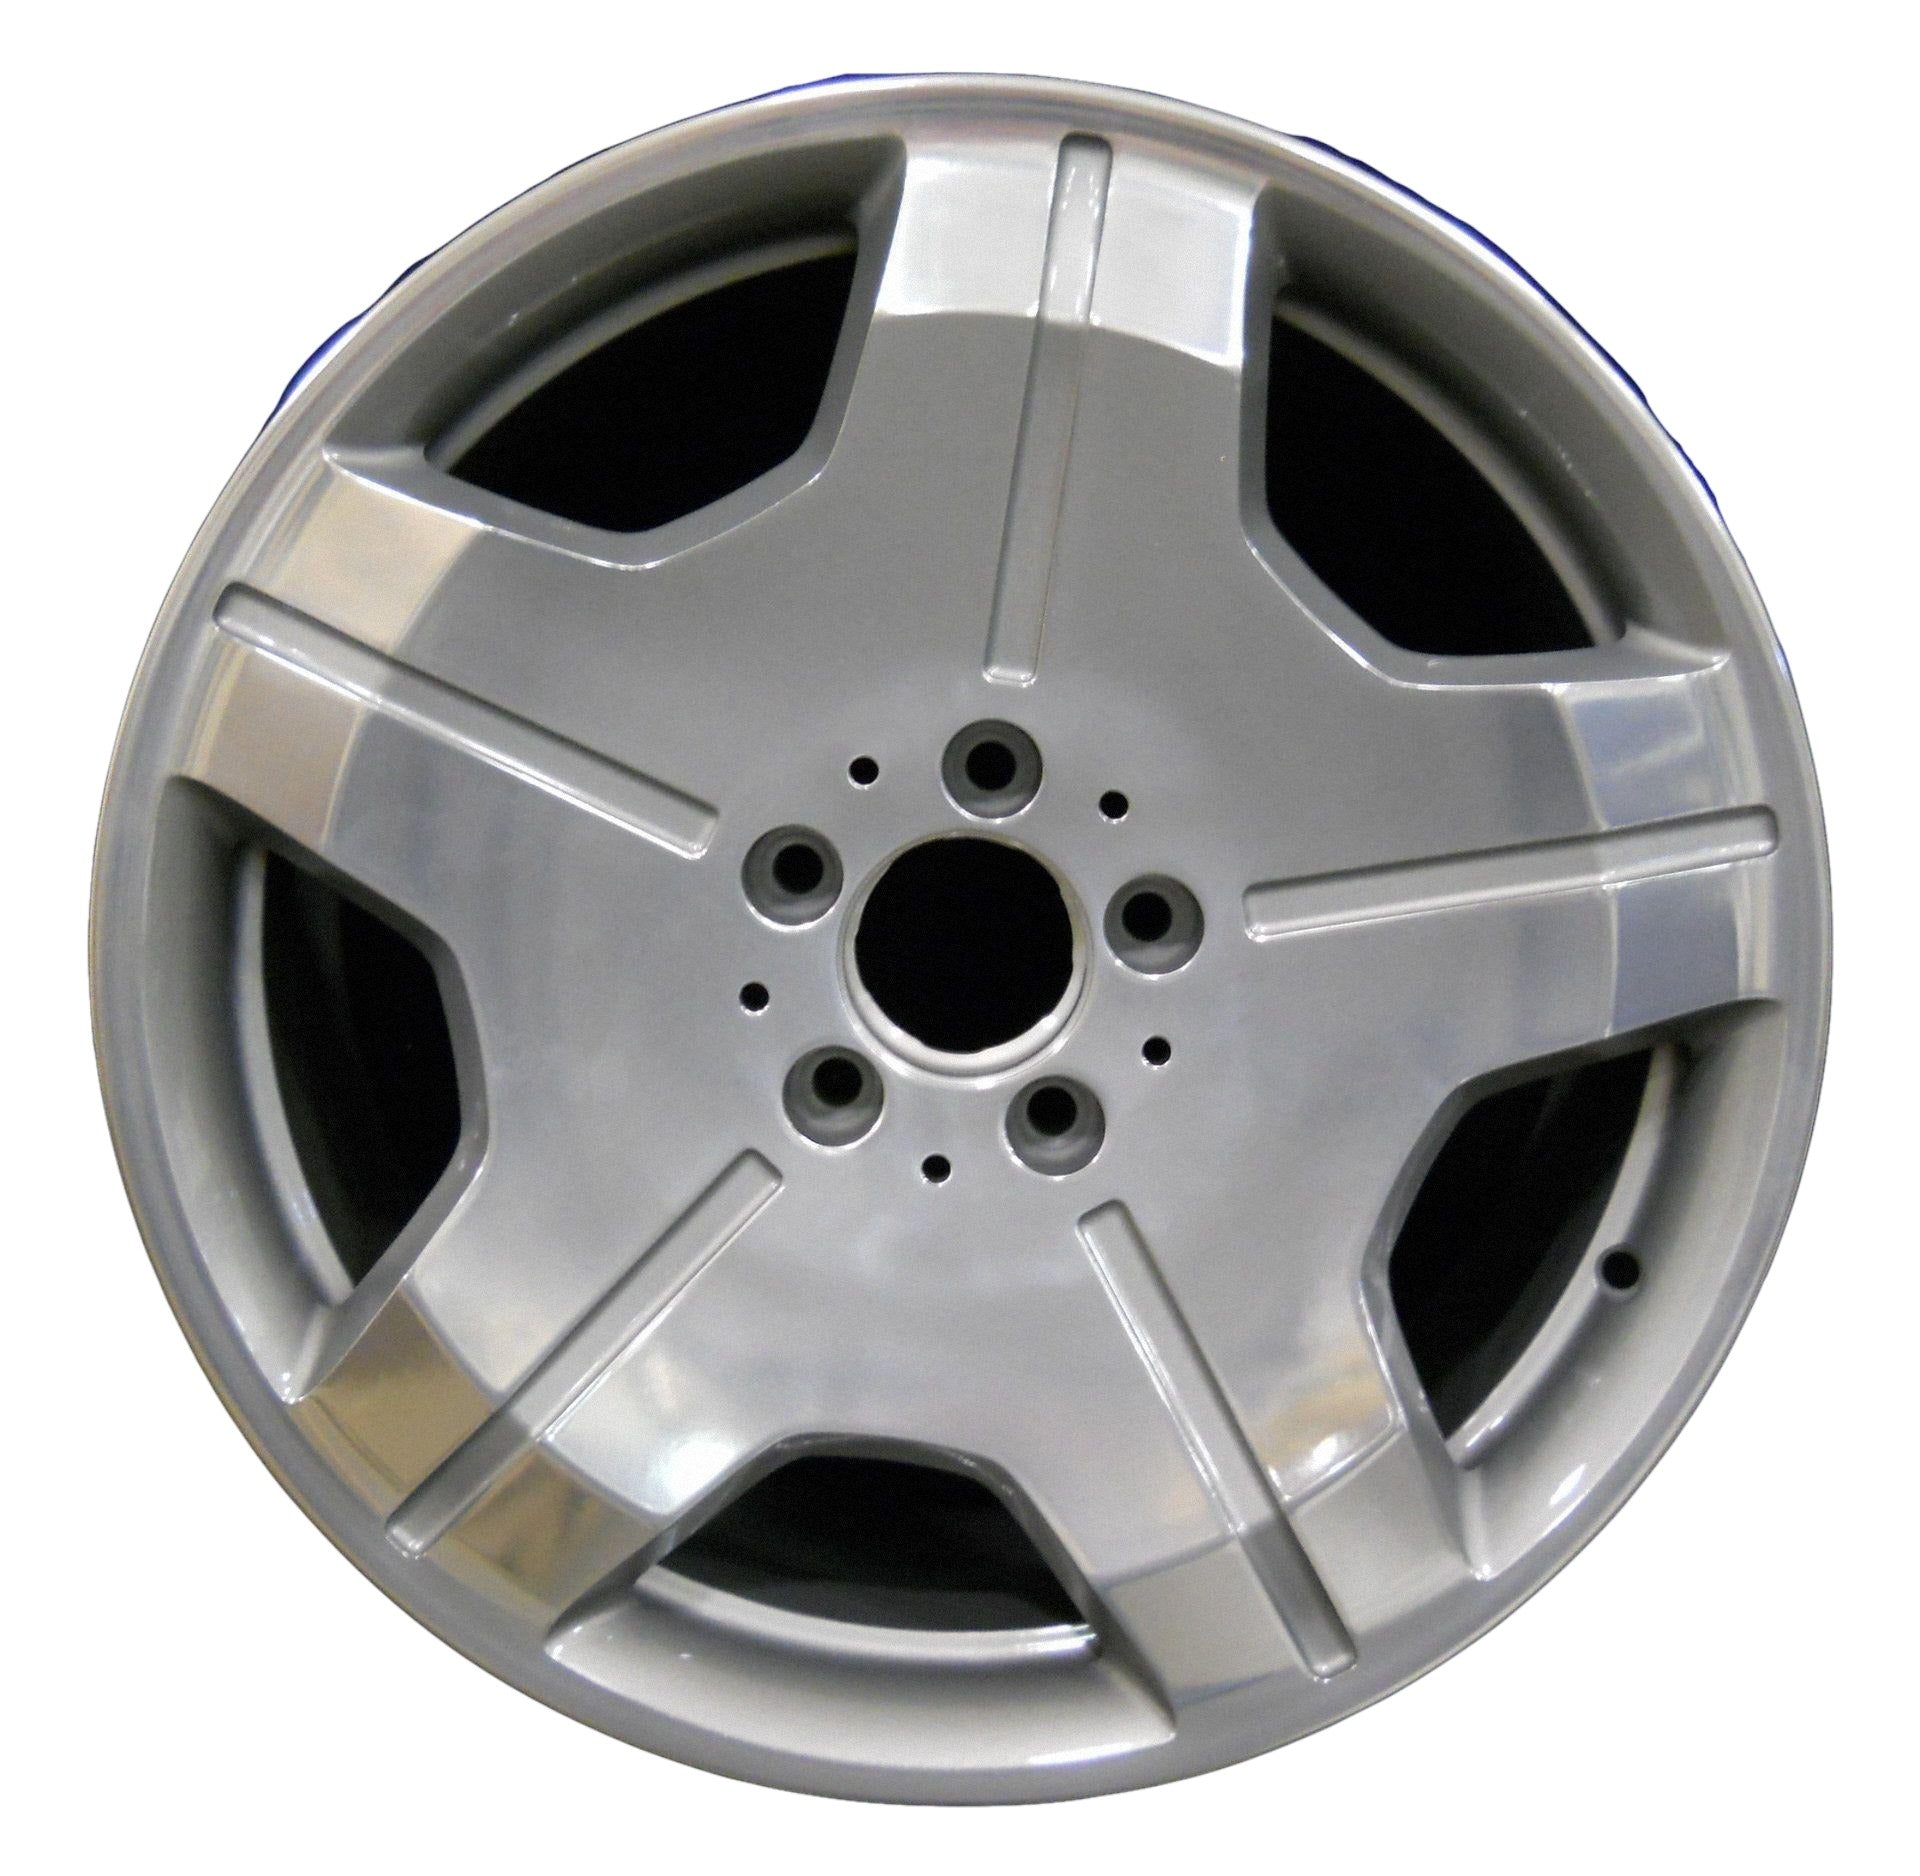 Mercedes CL600  2007, 2008 Factory OEM Car Wheel Size 18x8.5 Alloy WAO.65505FT.LC40.POL